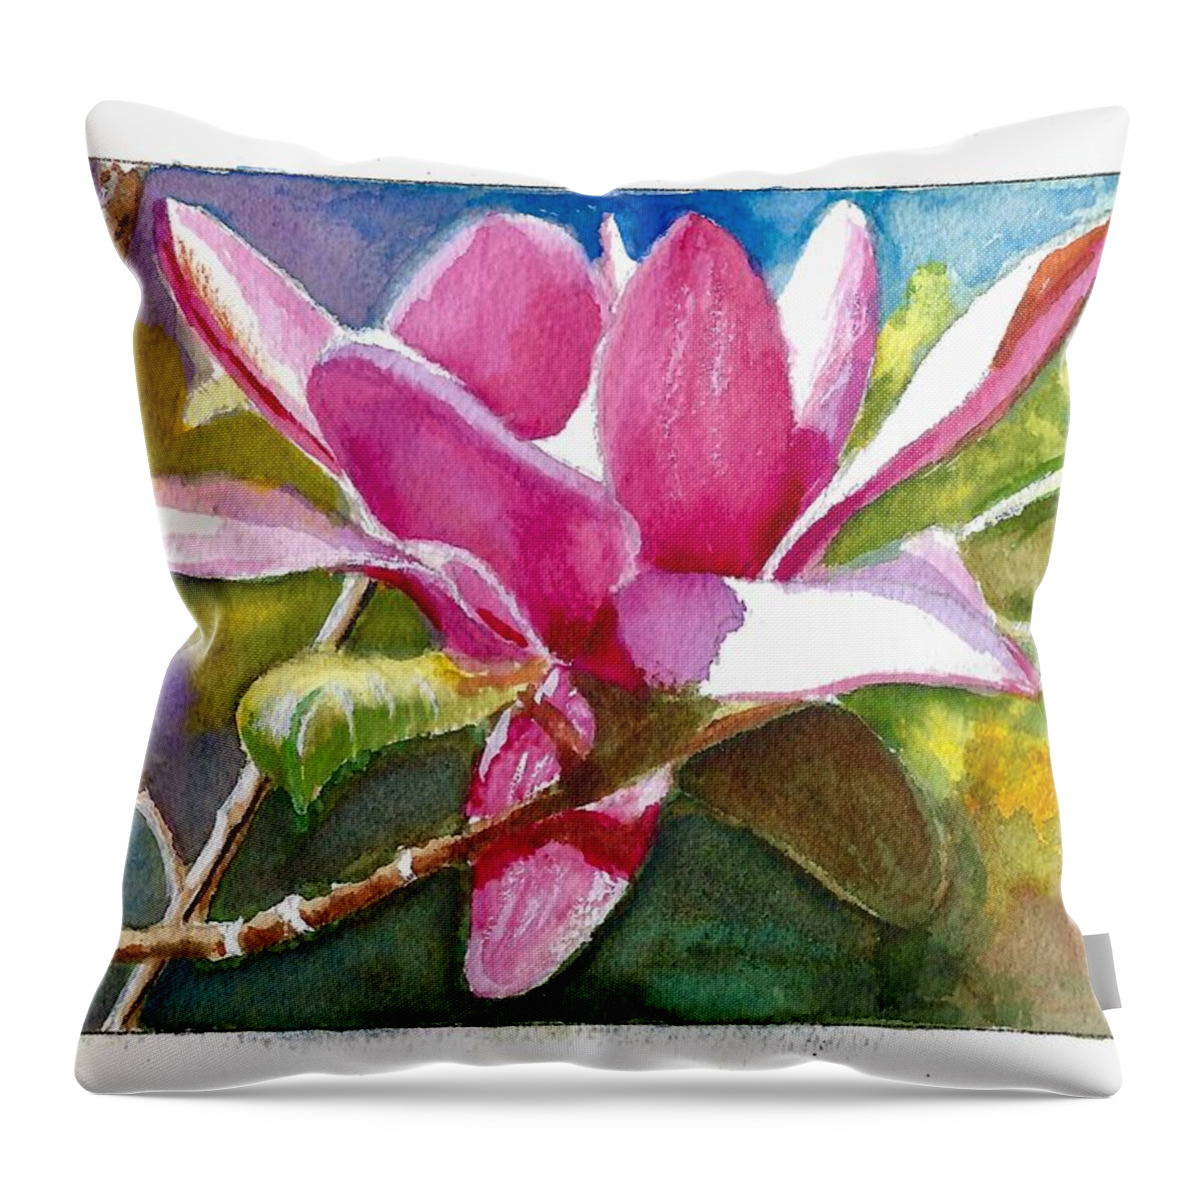 Flower Throw Pillow featuring the painting Magnolia Greeting Card by Dai Wynn